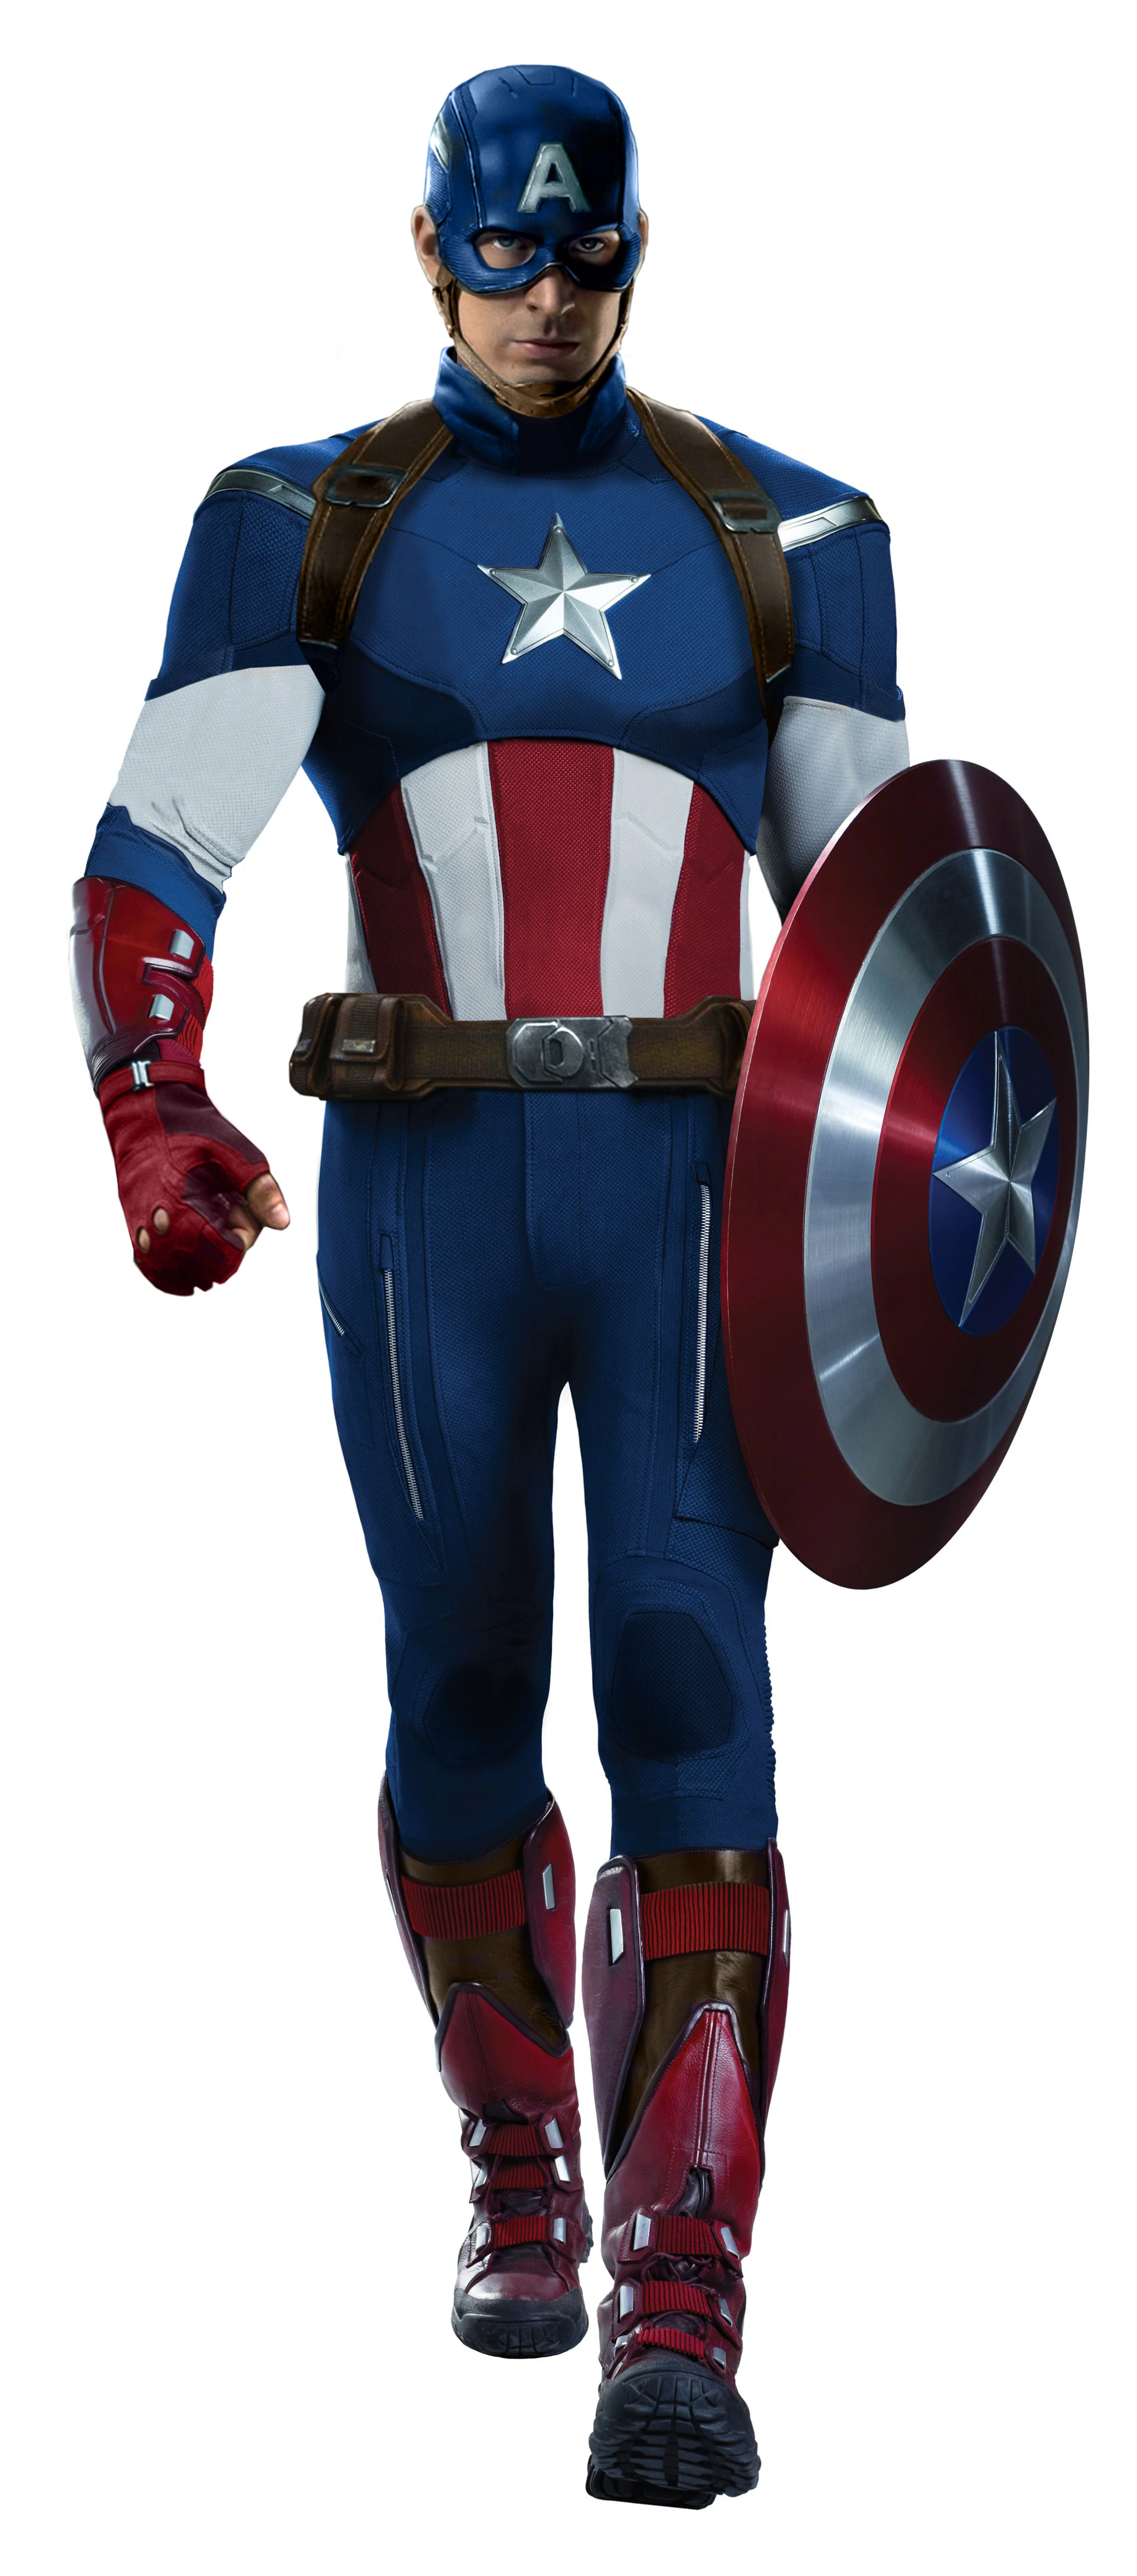 Captain americas avengers suit my version never was keen of it so i tried modernizing some elements helmet and neck white arms different glovesbelt straps symmetrical chest i still had in mind that coulson designed it so i did my best to keep it as